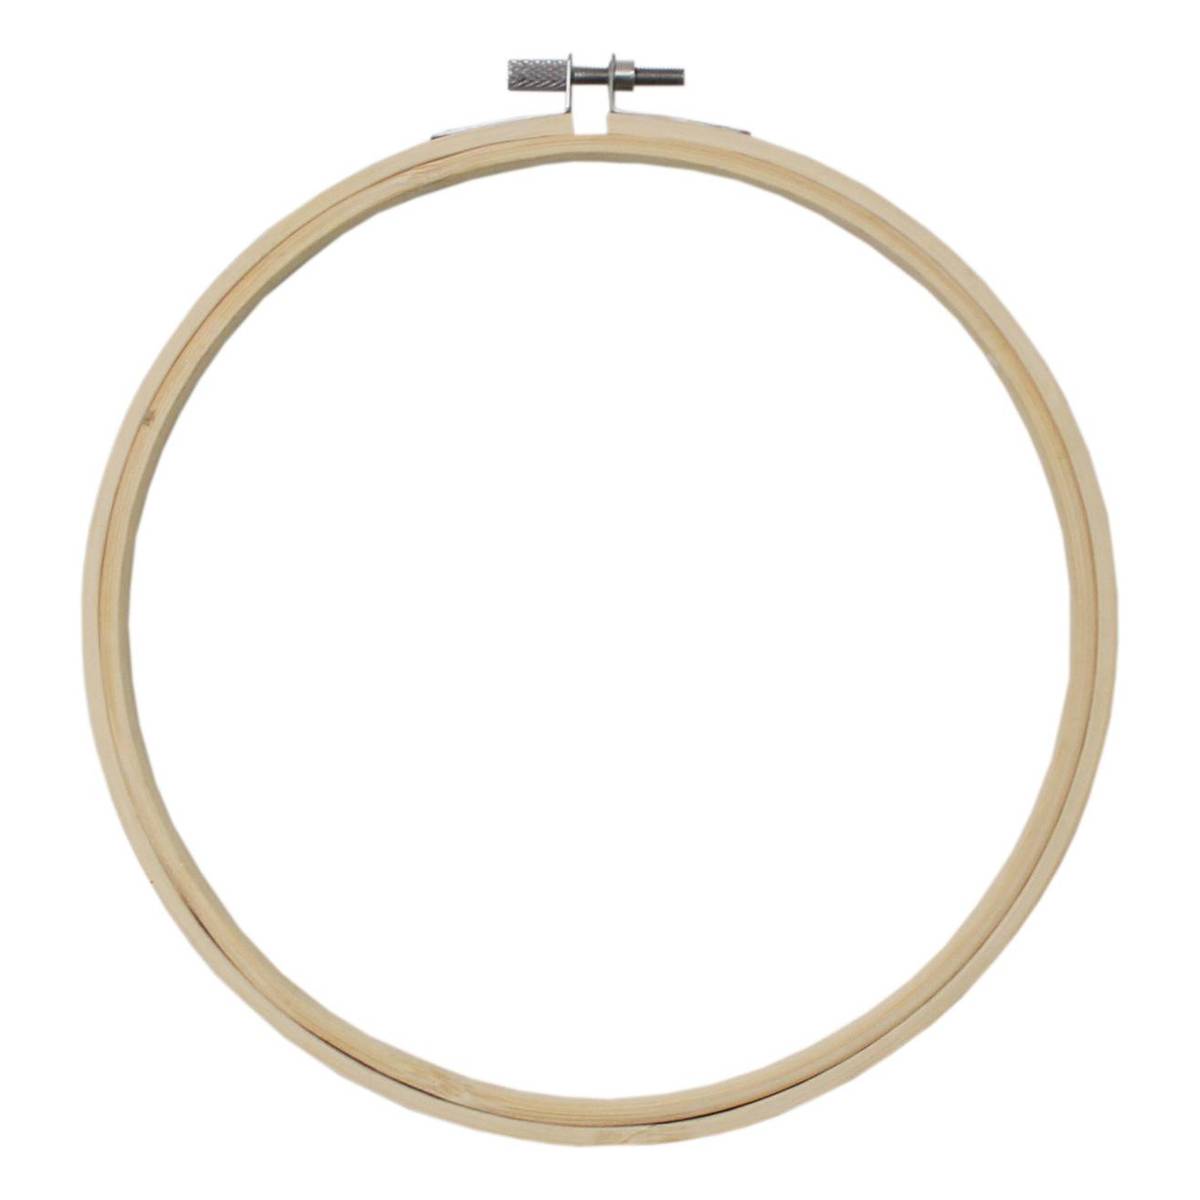 Bamboo Embroidery Hoop 7 Inches | Hobbycraft